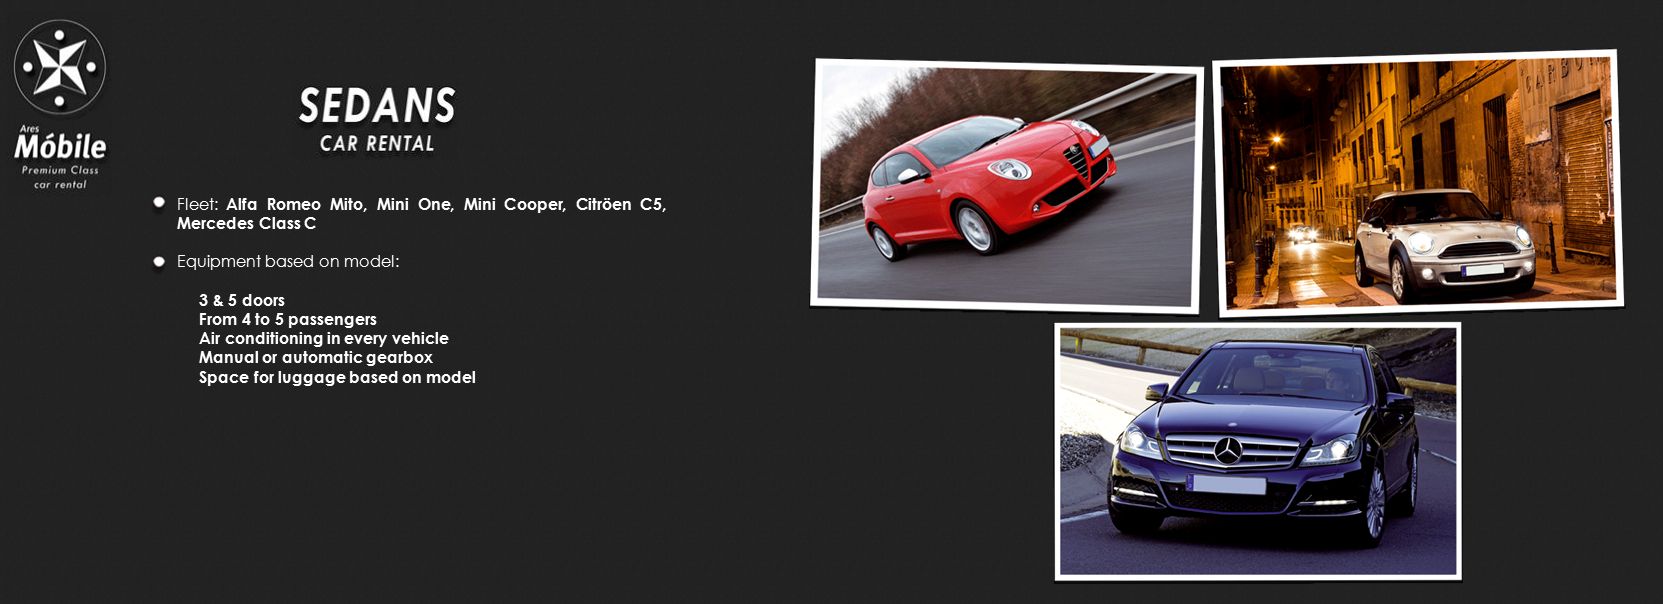 Fleet: Alfa Romeo Mito, Mini One, Mini Cooper, Citröen C5, Mercedes Class C Equipment based on model: 3 & 5 doors From 4 to 5 passengers Air conditioning in every vehicle Manual or automatic gearbox Space for luggage based on model